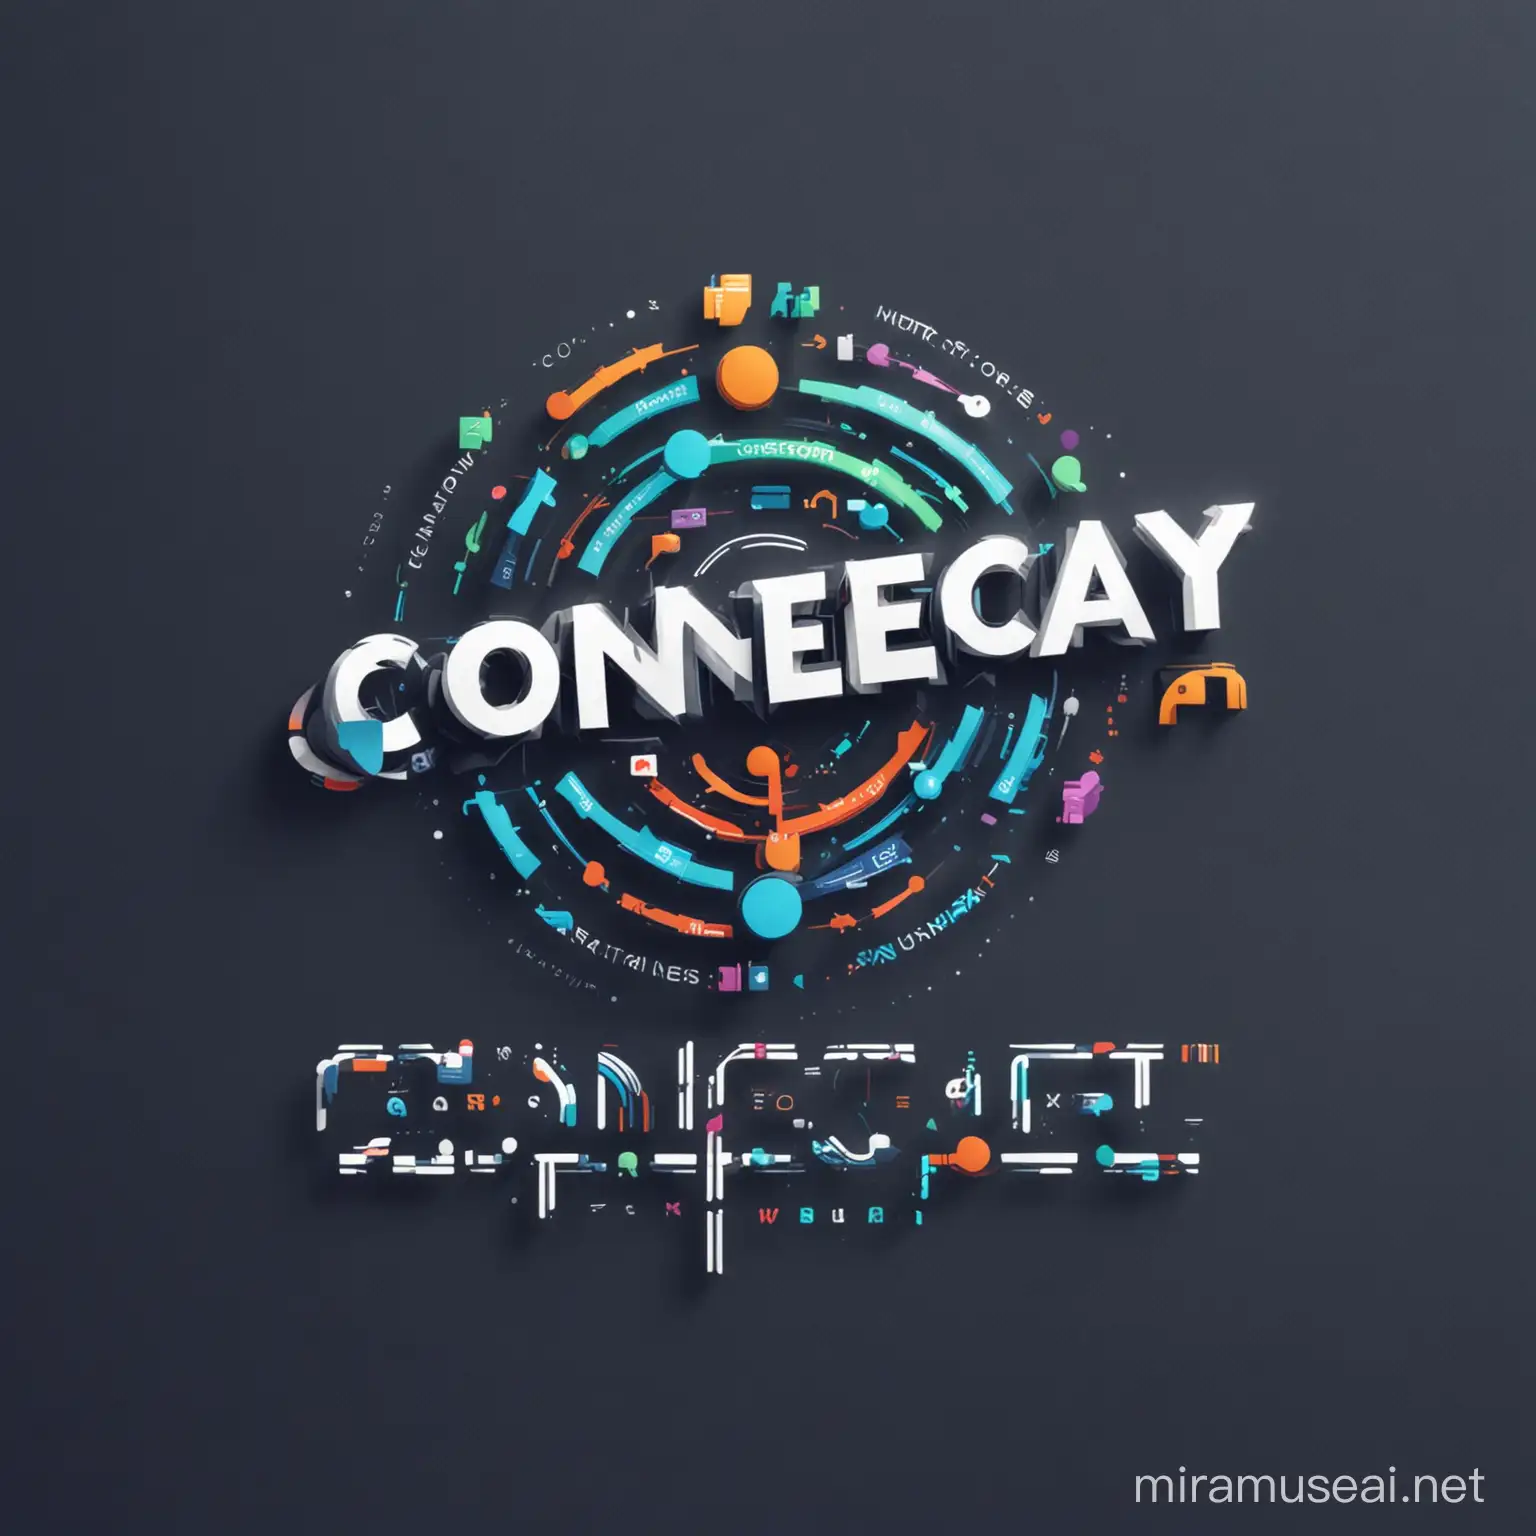 The "ConnectPay" logo concept revolves around the idea of connectivity and efficiency in payroll management through API integration. It features stylized lettering and an abstract design element that represents connectivity and data exchange. The color scheme is kept modern and professional, with contrasting shades to create visual interest.